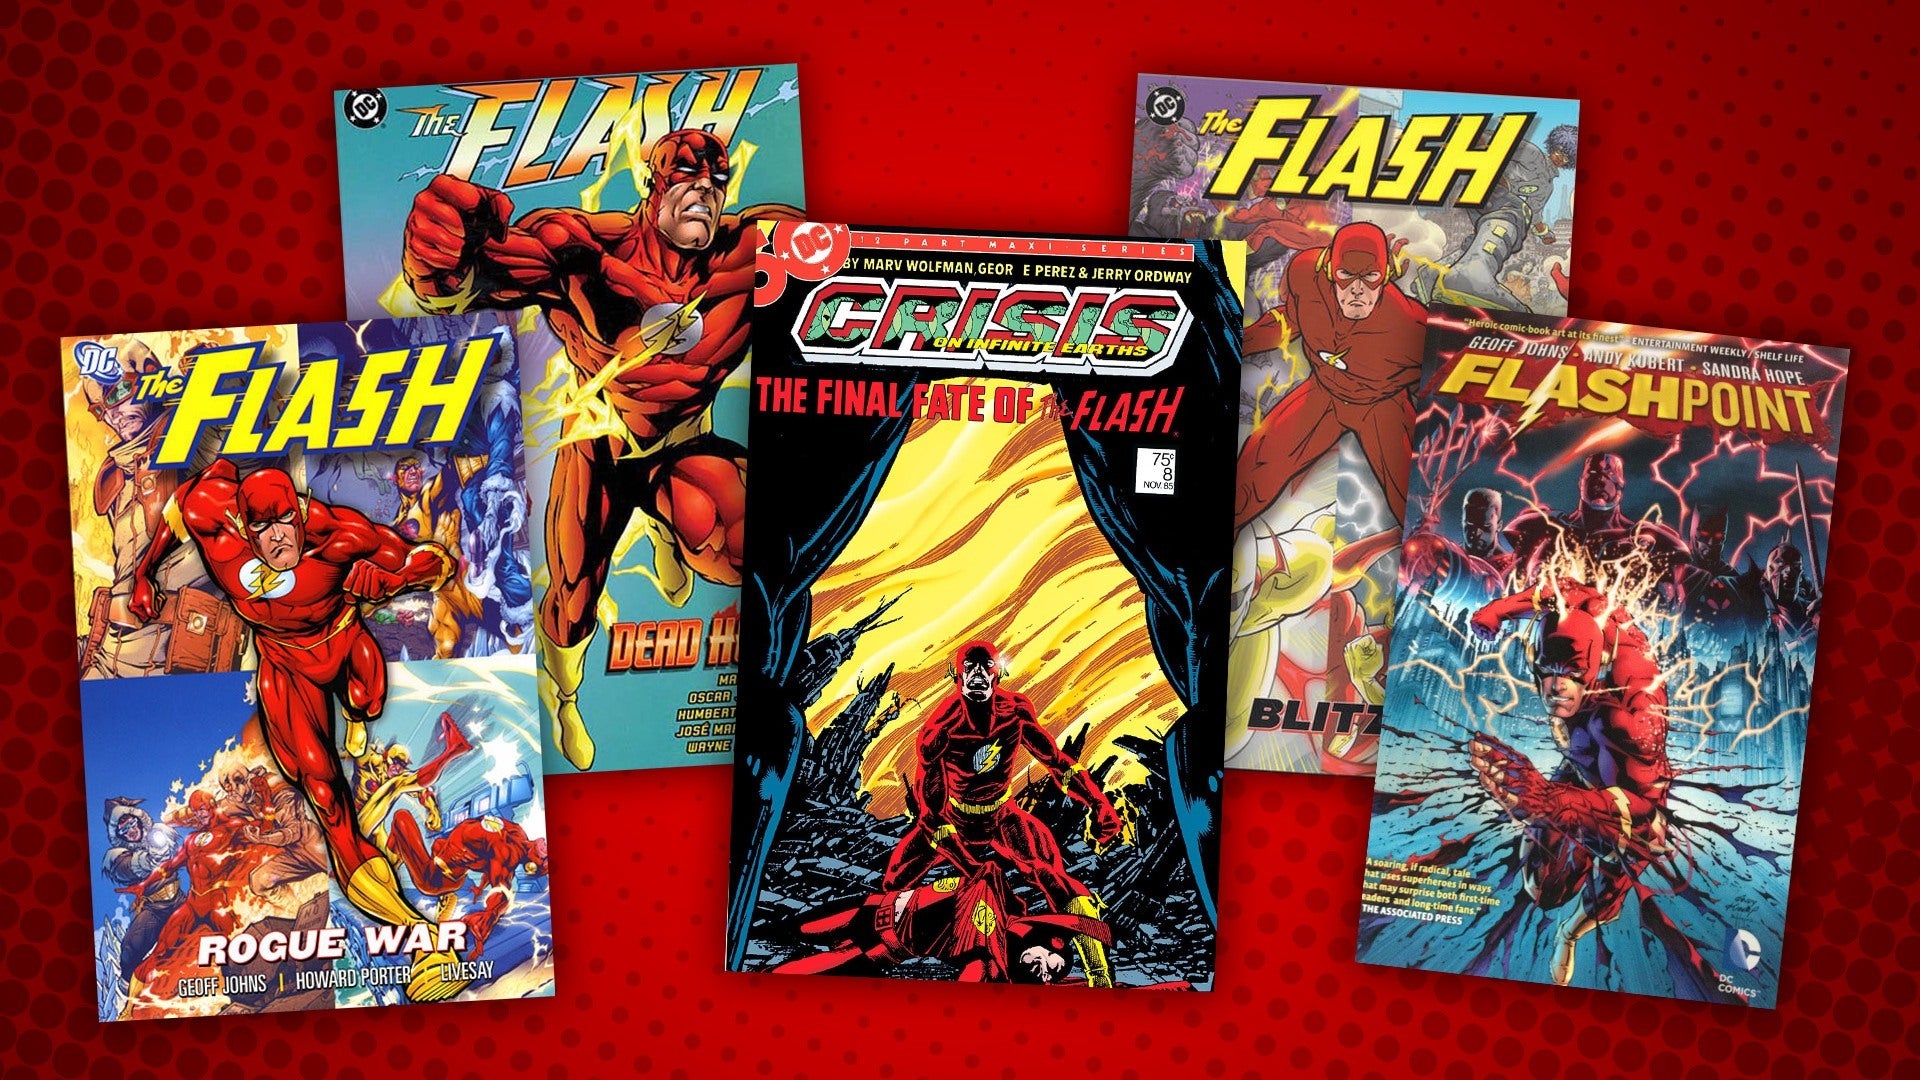 Check Out The 10 Best Flash Comics You Need To Read - Flash: Rogue War - HD Wallpaper 